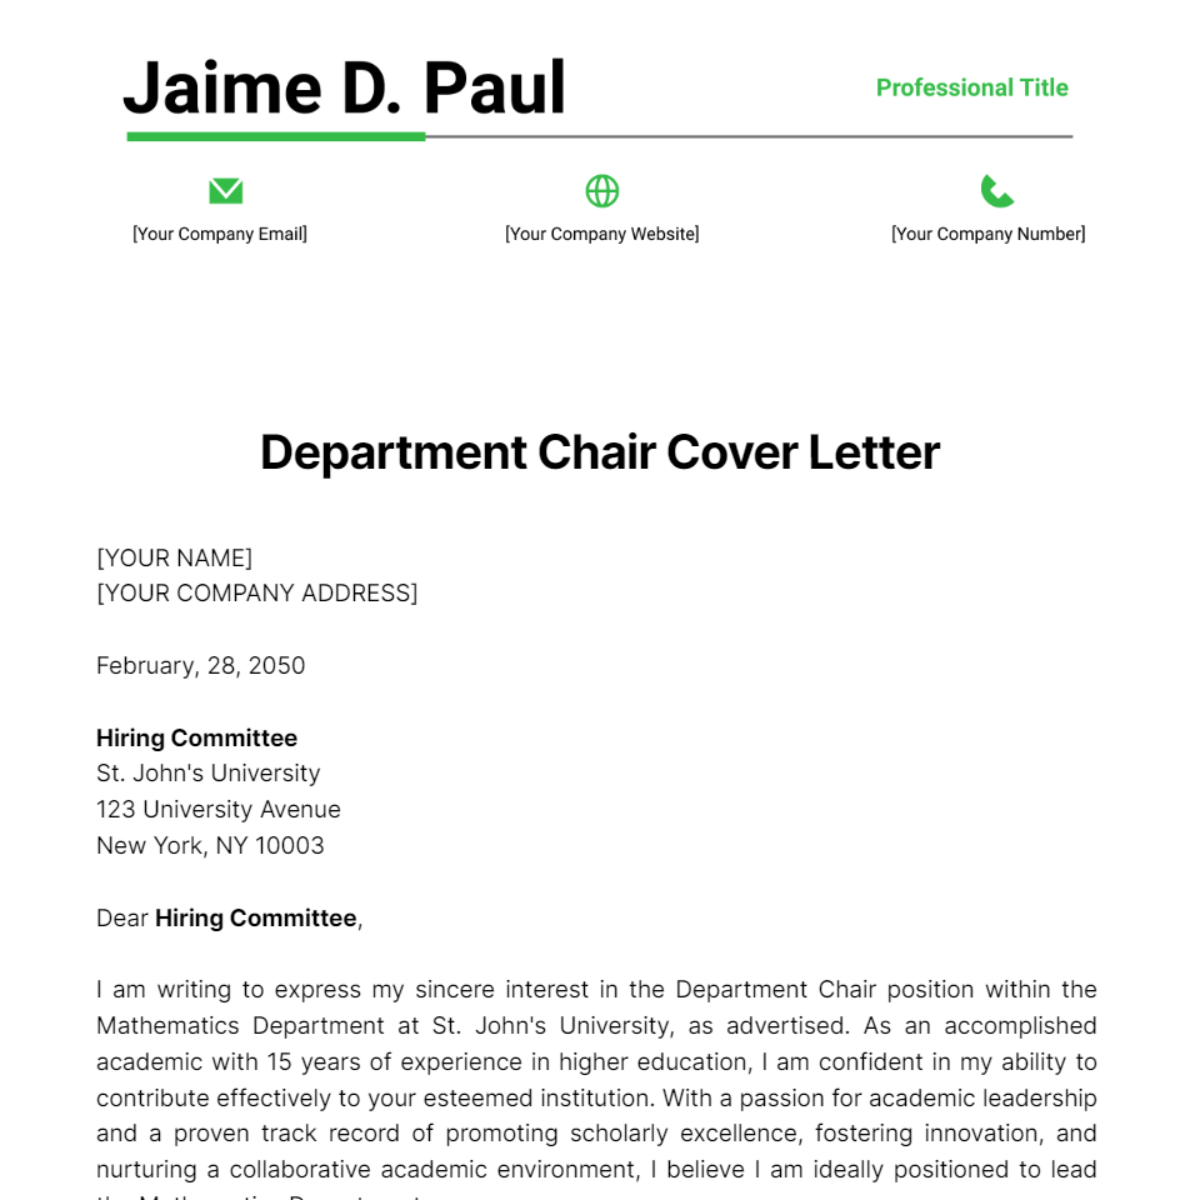 Department Chair Cover Letter Template